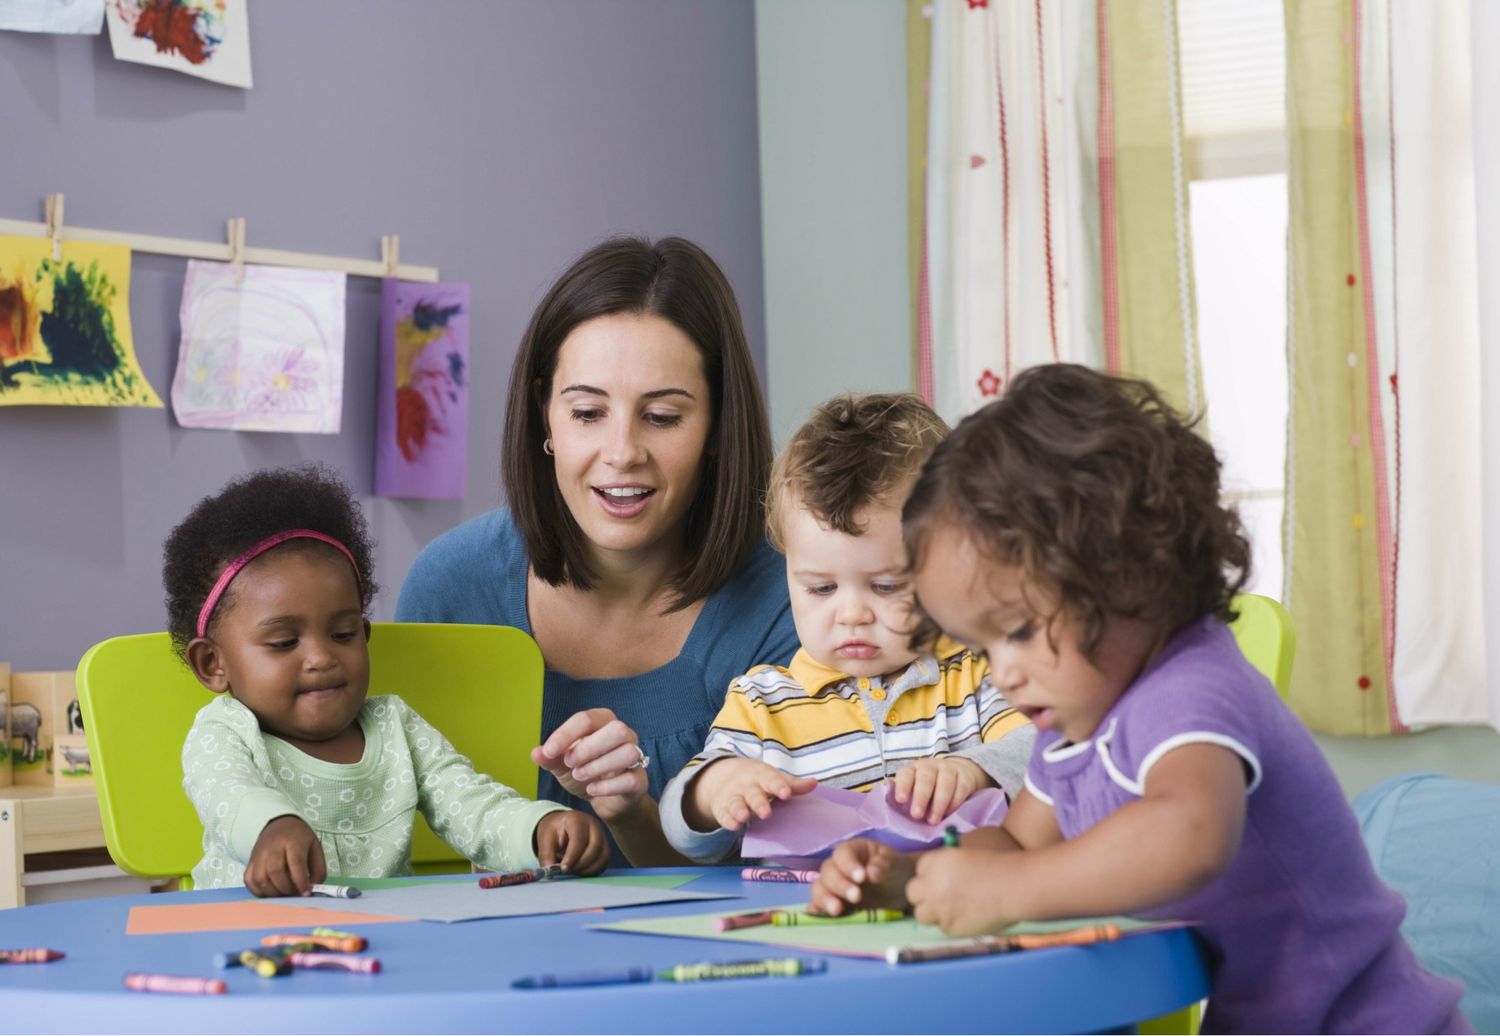 Top Daycare and Childcare Trends Parents Should Know About